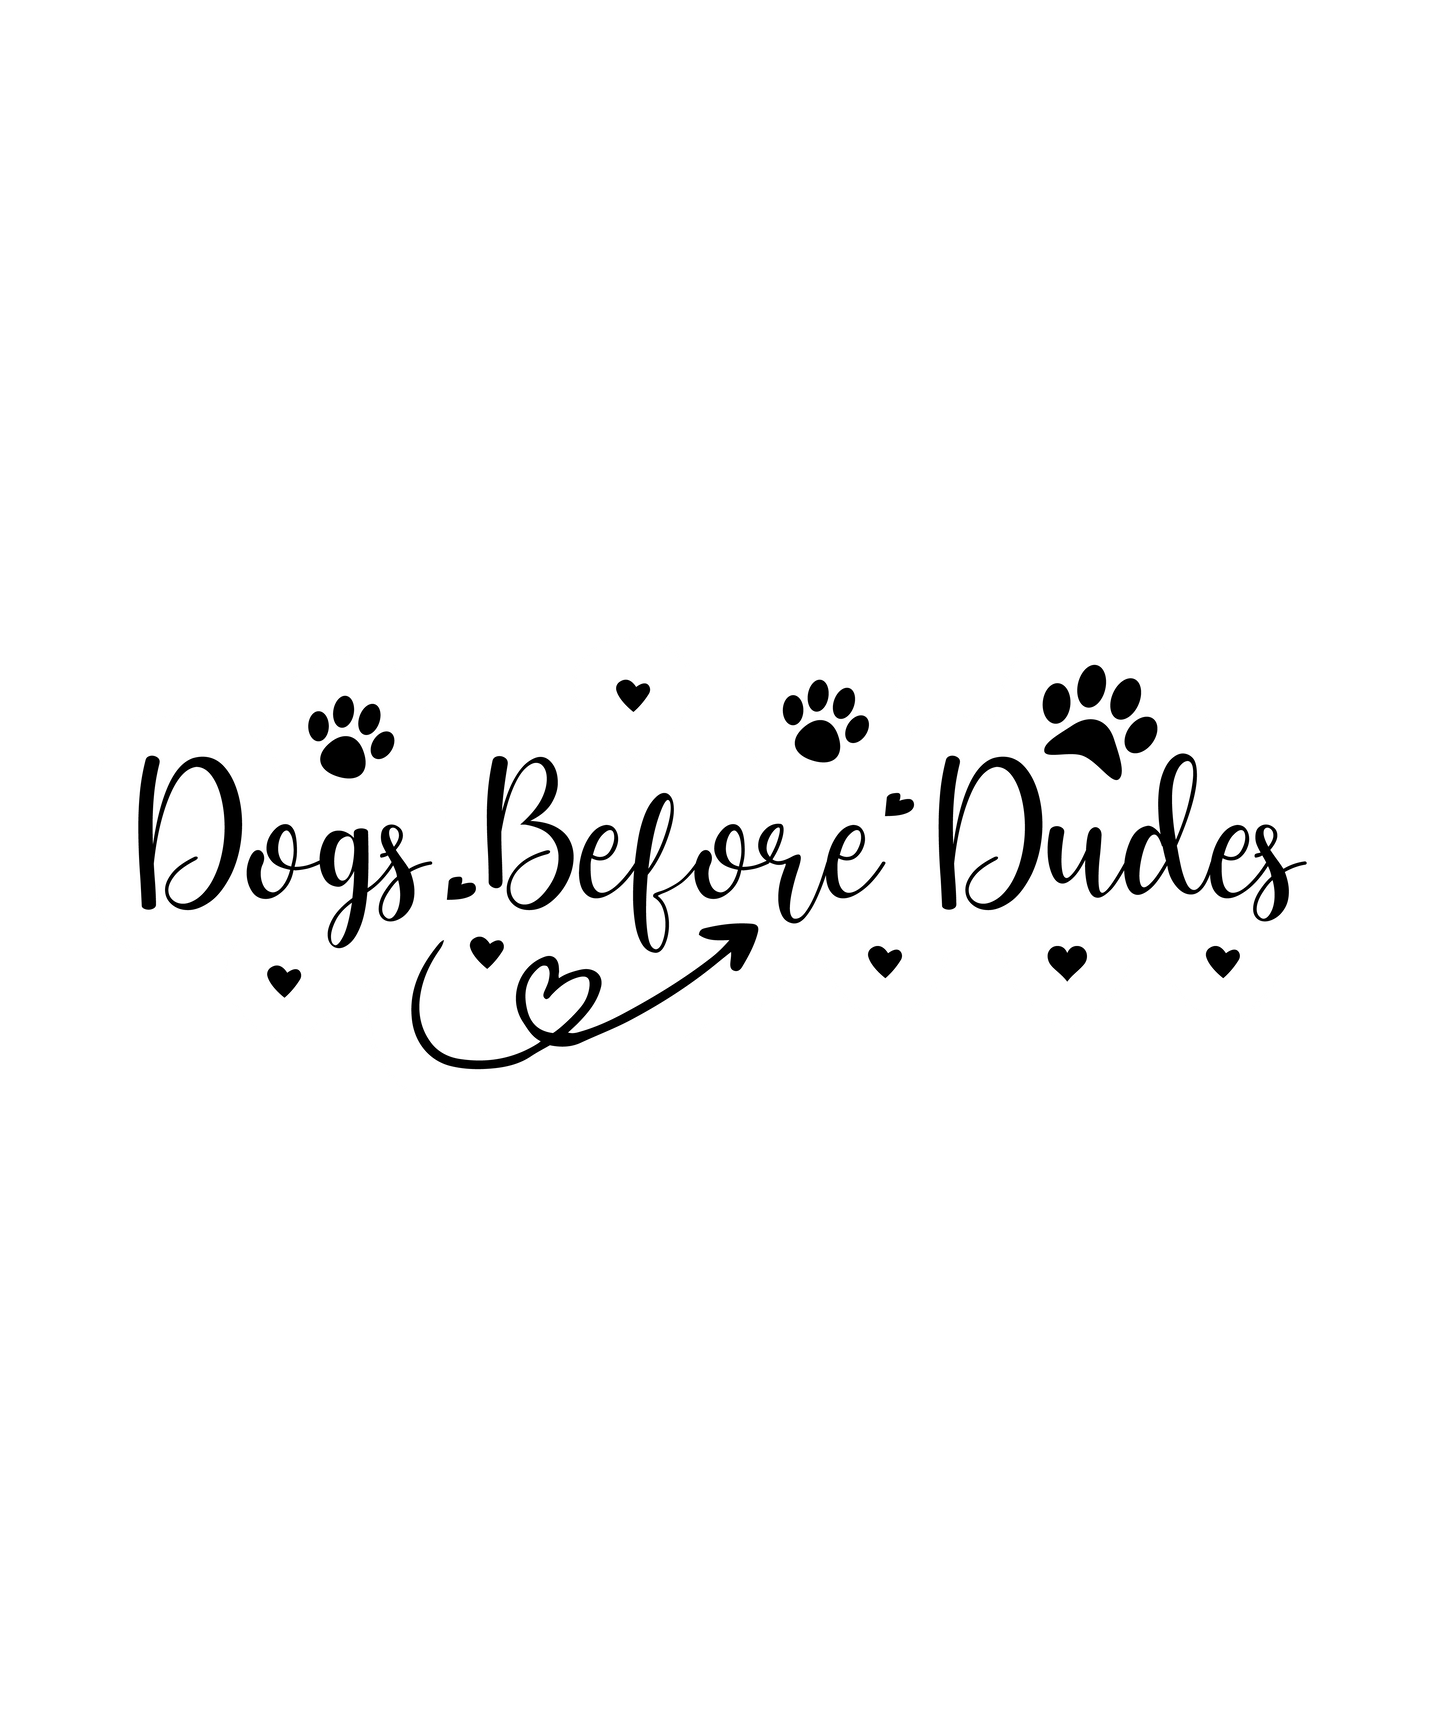 Stickers - Dogs Before Dudes Sticker, Dog Lovers' Stickers